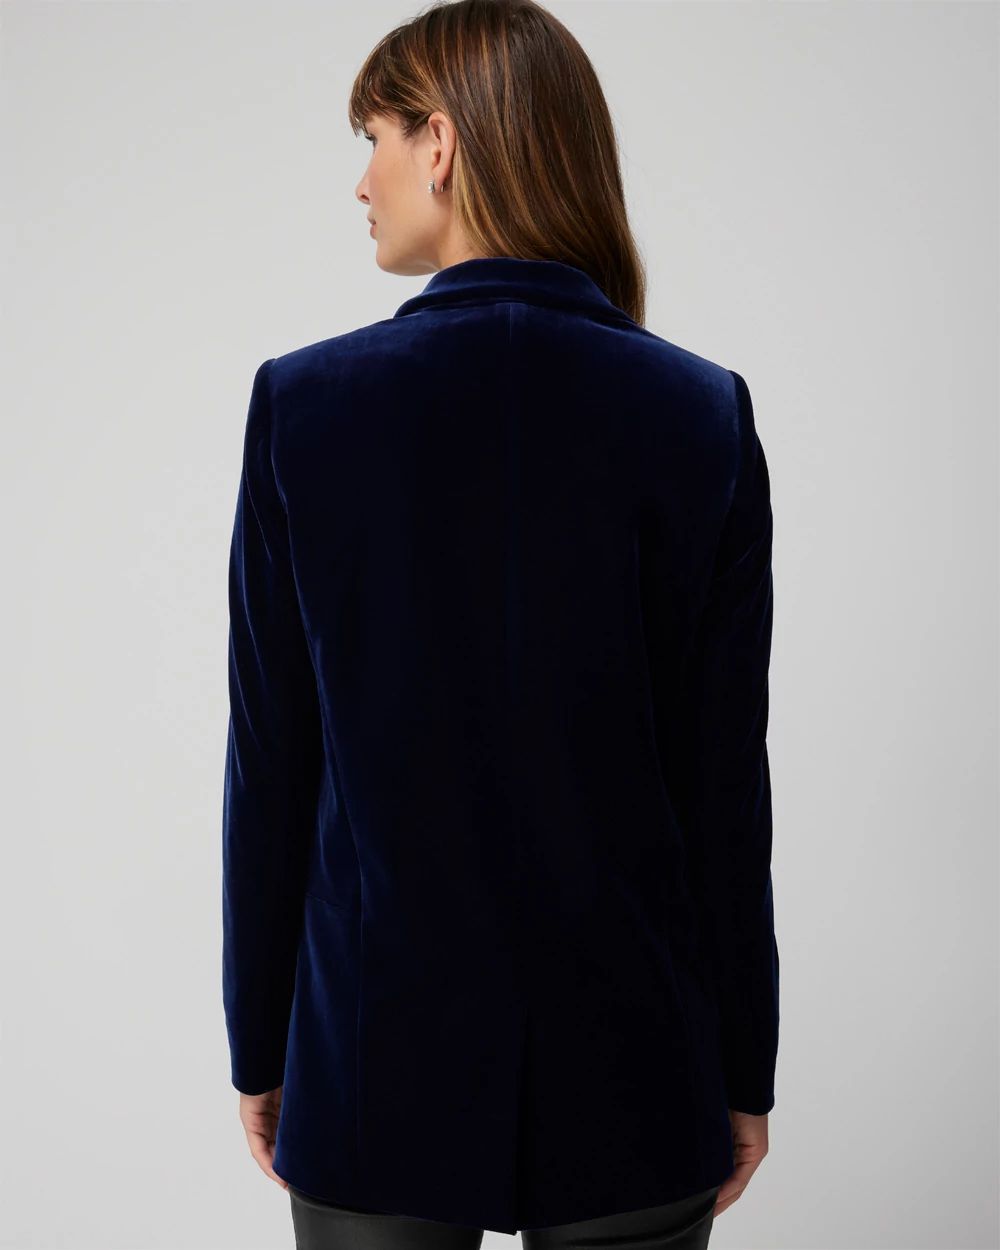 Petite Velvet Relaxed Blazer click to view larger image.